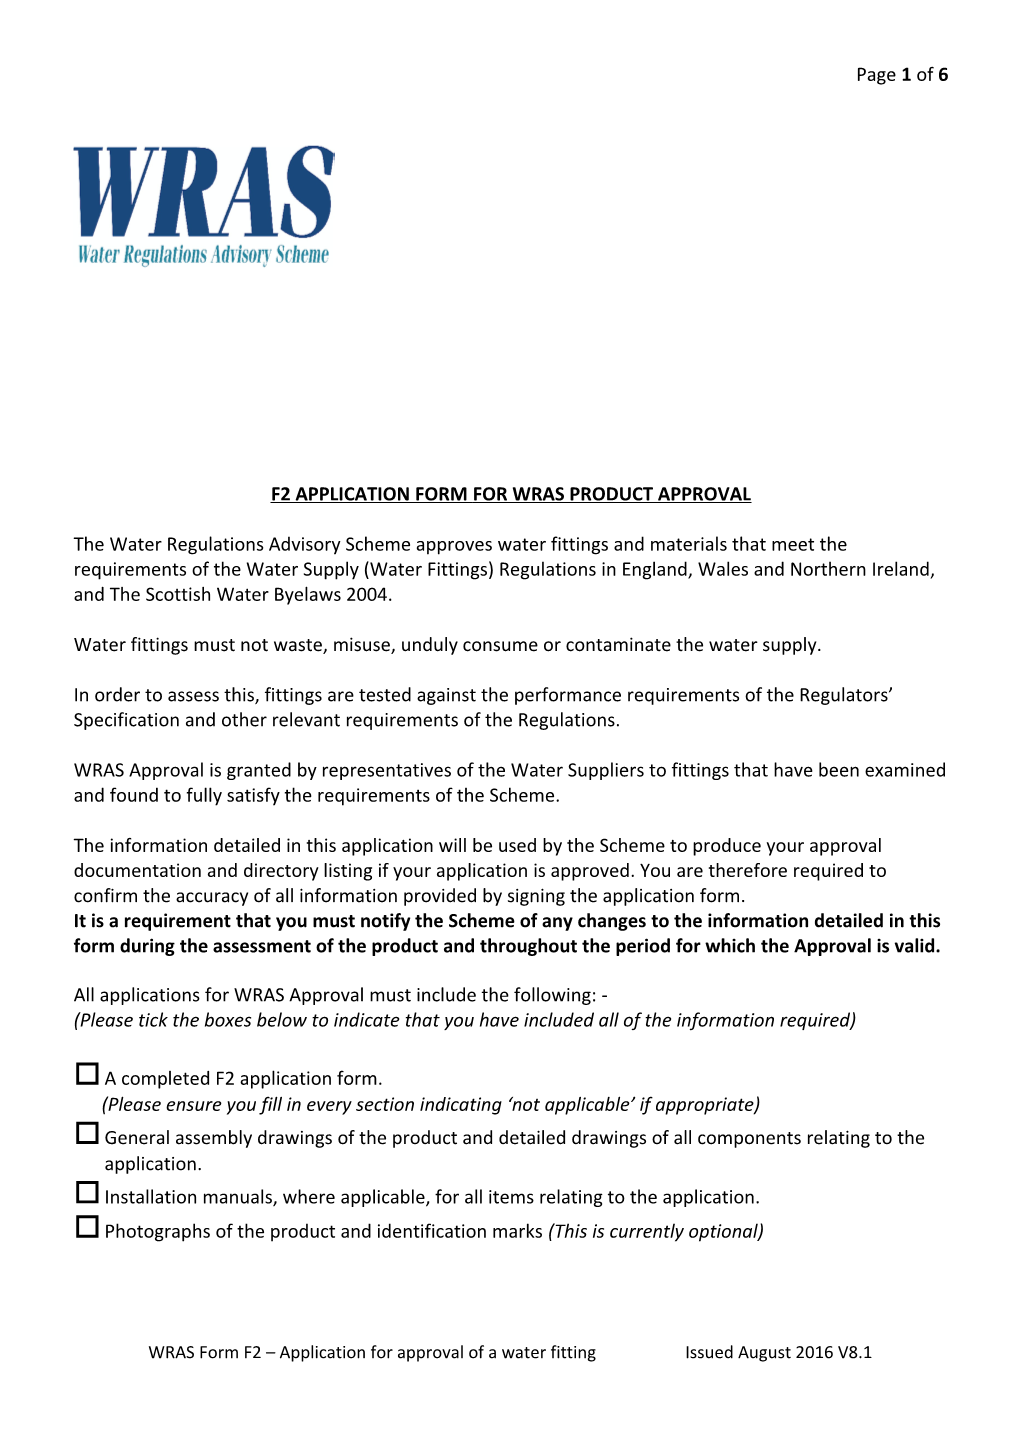 F2 Application Form for Wras Product Approval